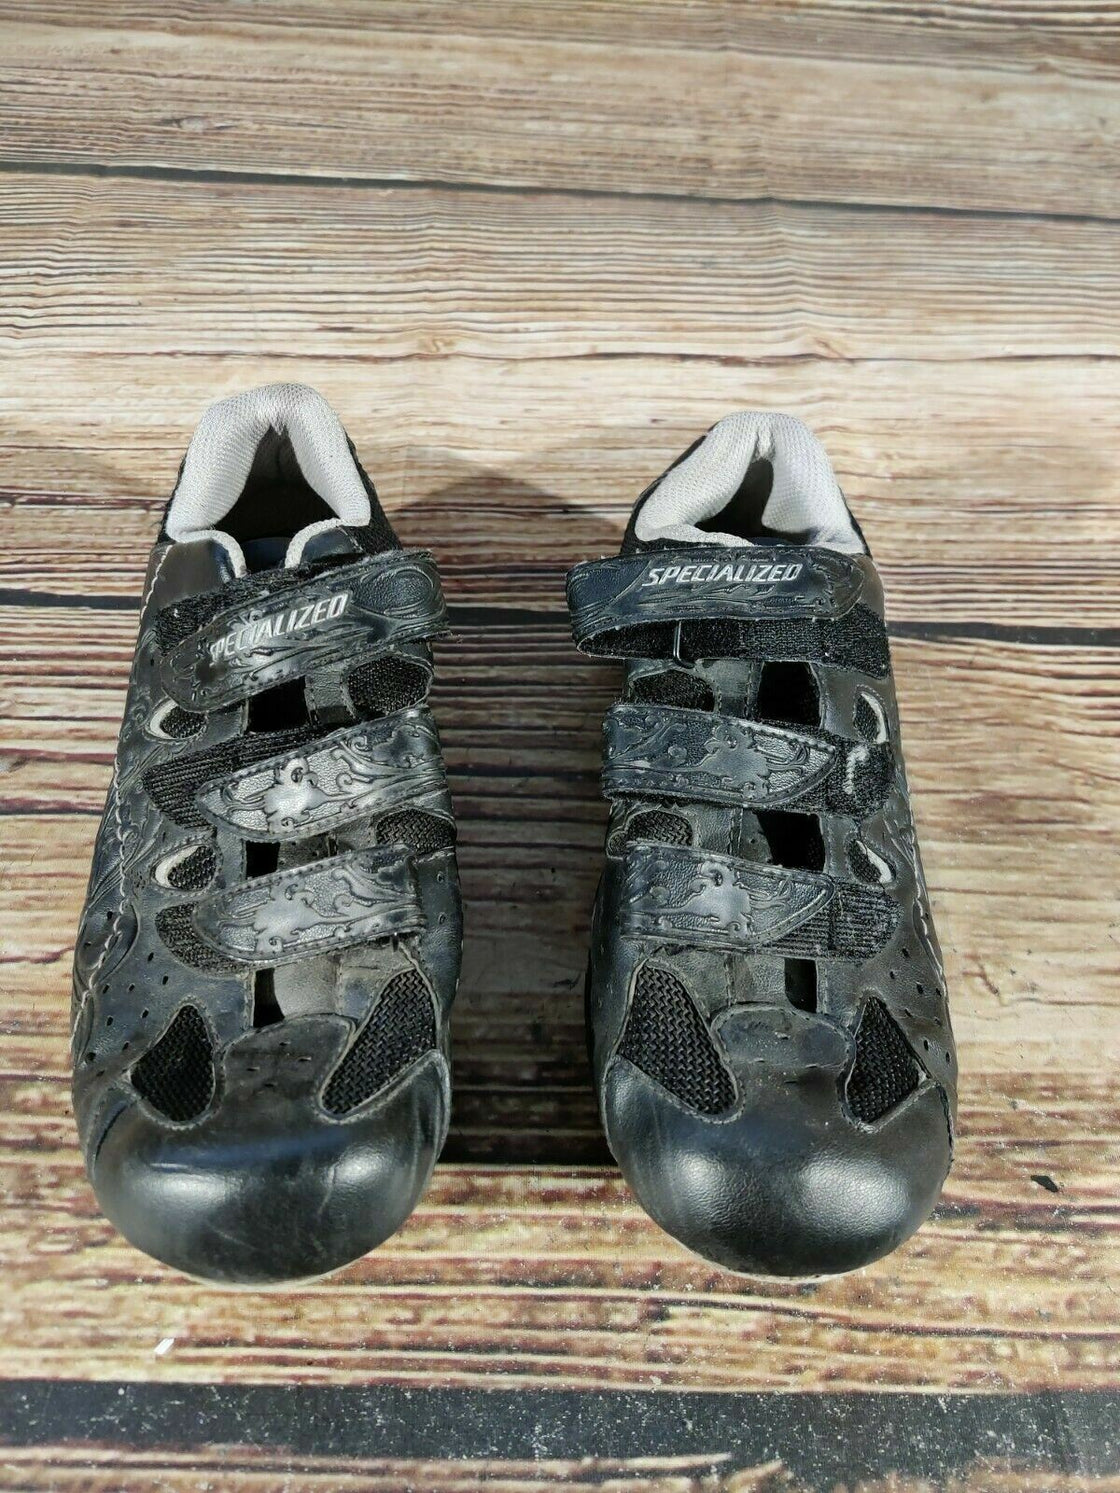 SPECIALIZED Road Cycling Shoes Bicycle Shoes Unisex Size EU39 Road Bike Shoes